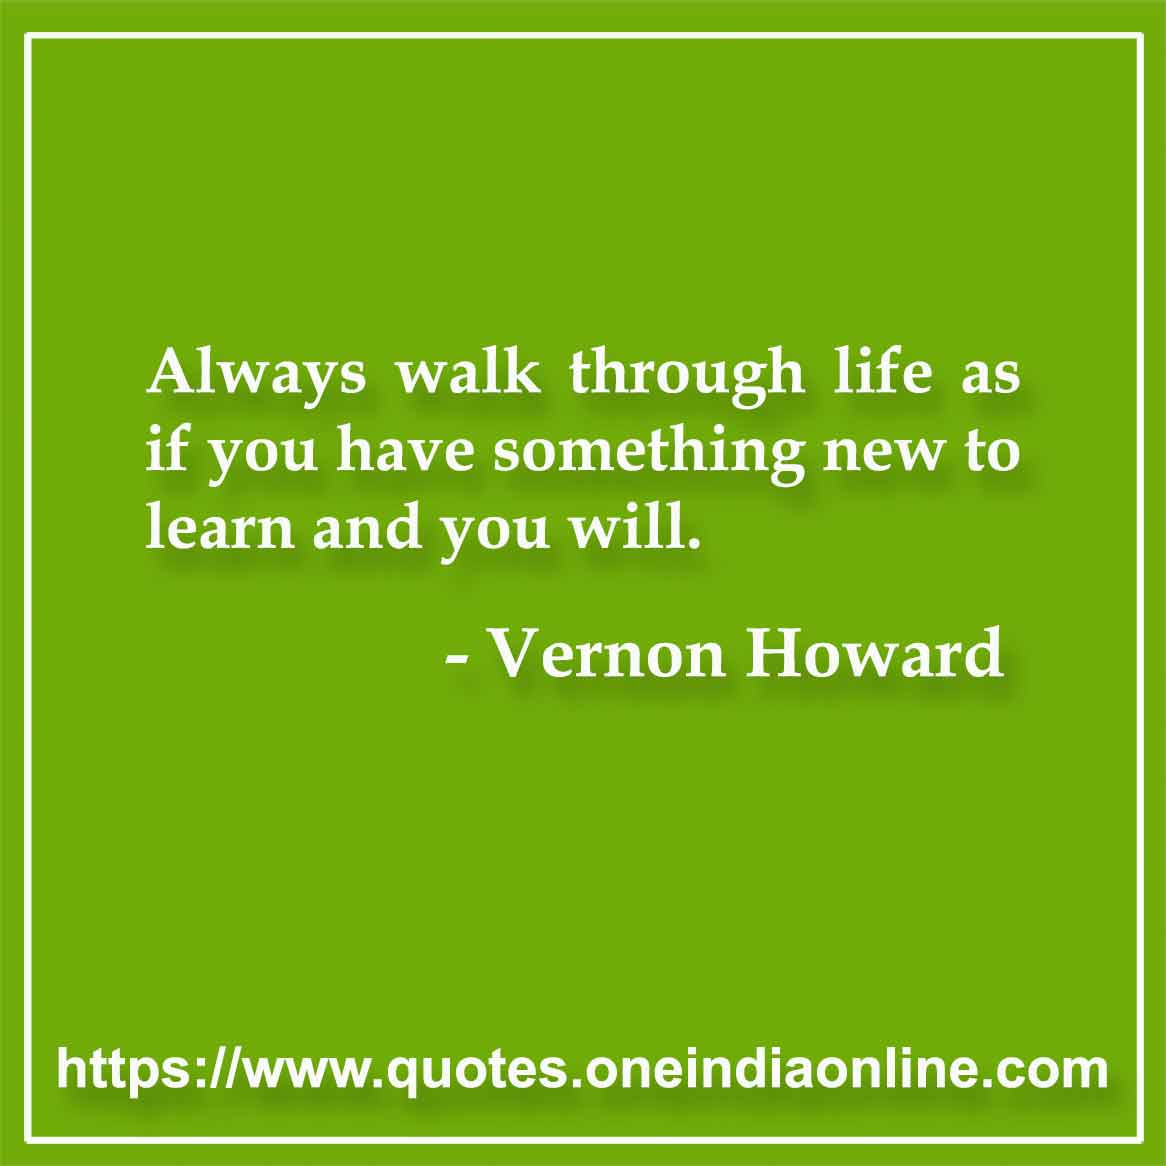 Always walk through life as if you have something new to learn and you will. Vernon Howard